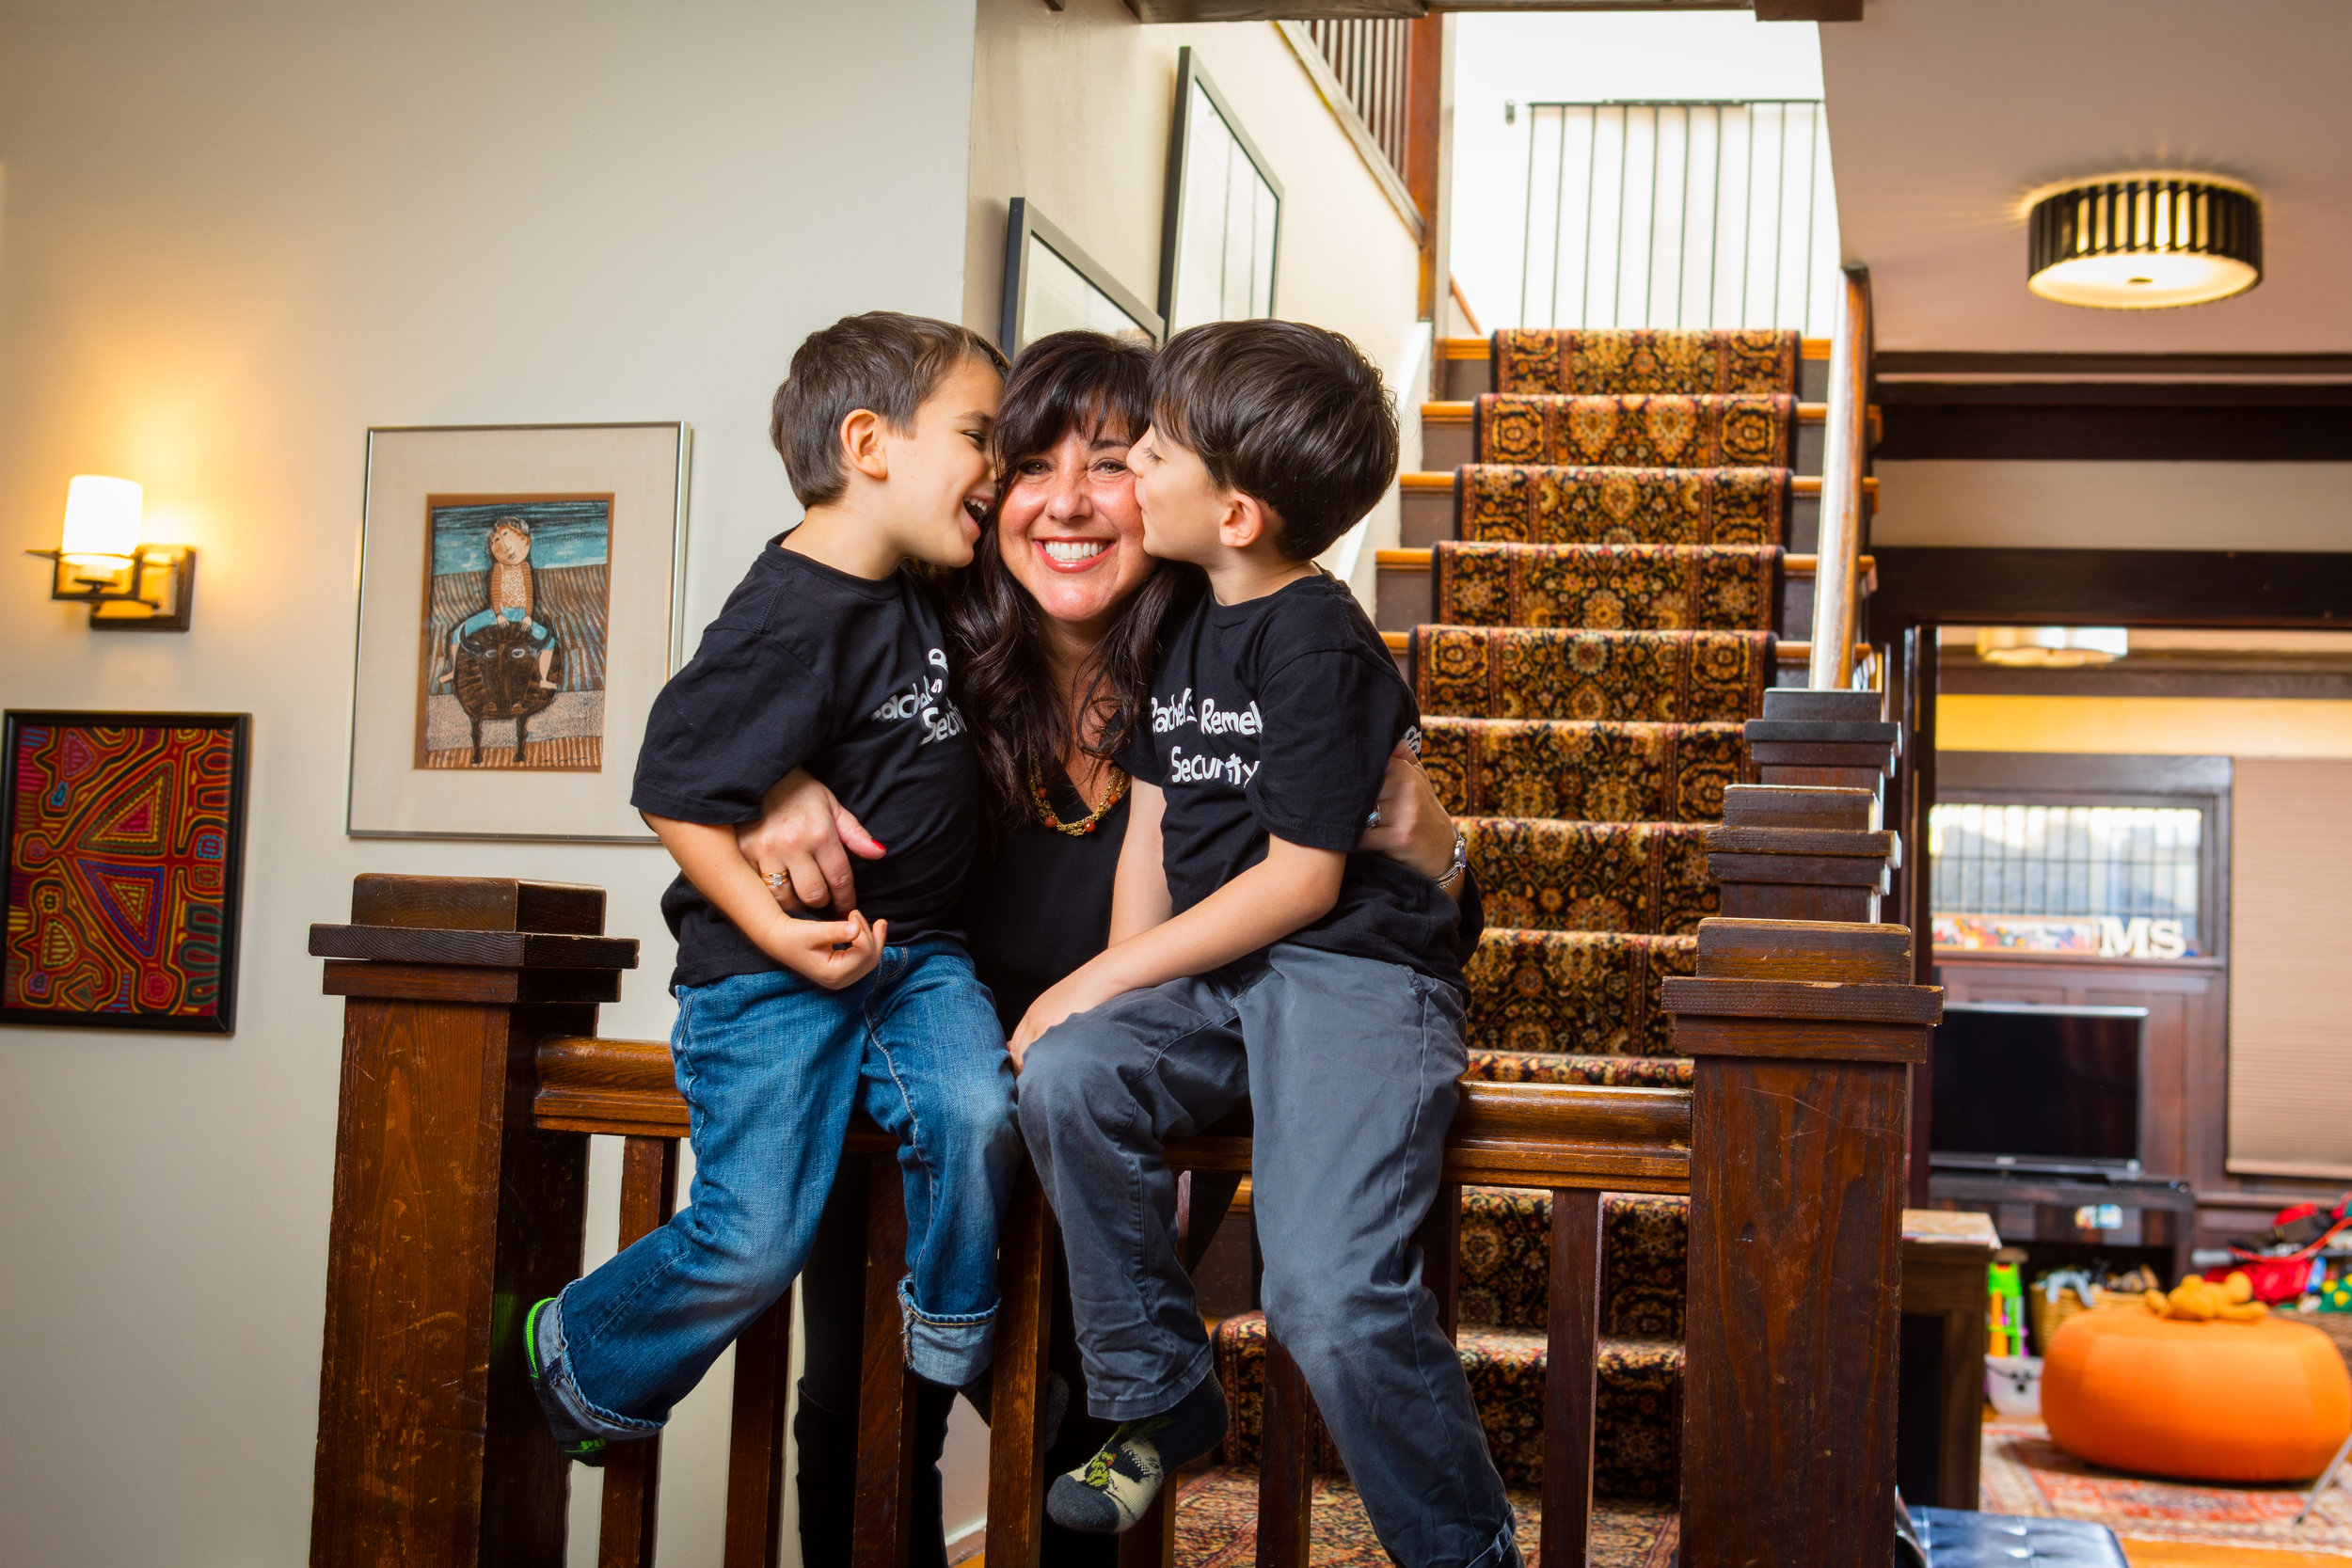  Rachel Jackson, founder of Rachel's Remedies is photographed with her sons at home in Buffalo, NY.  